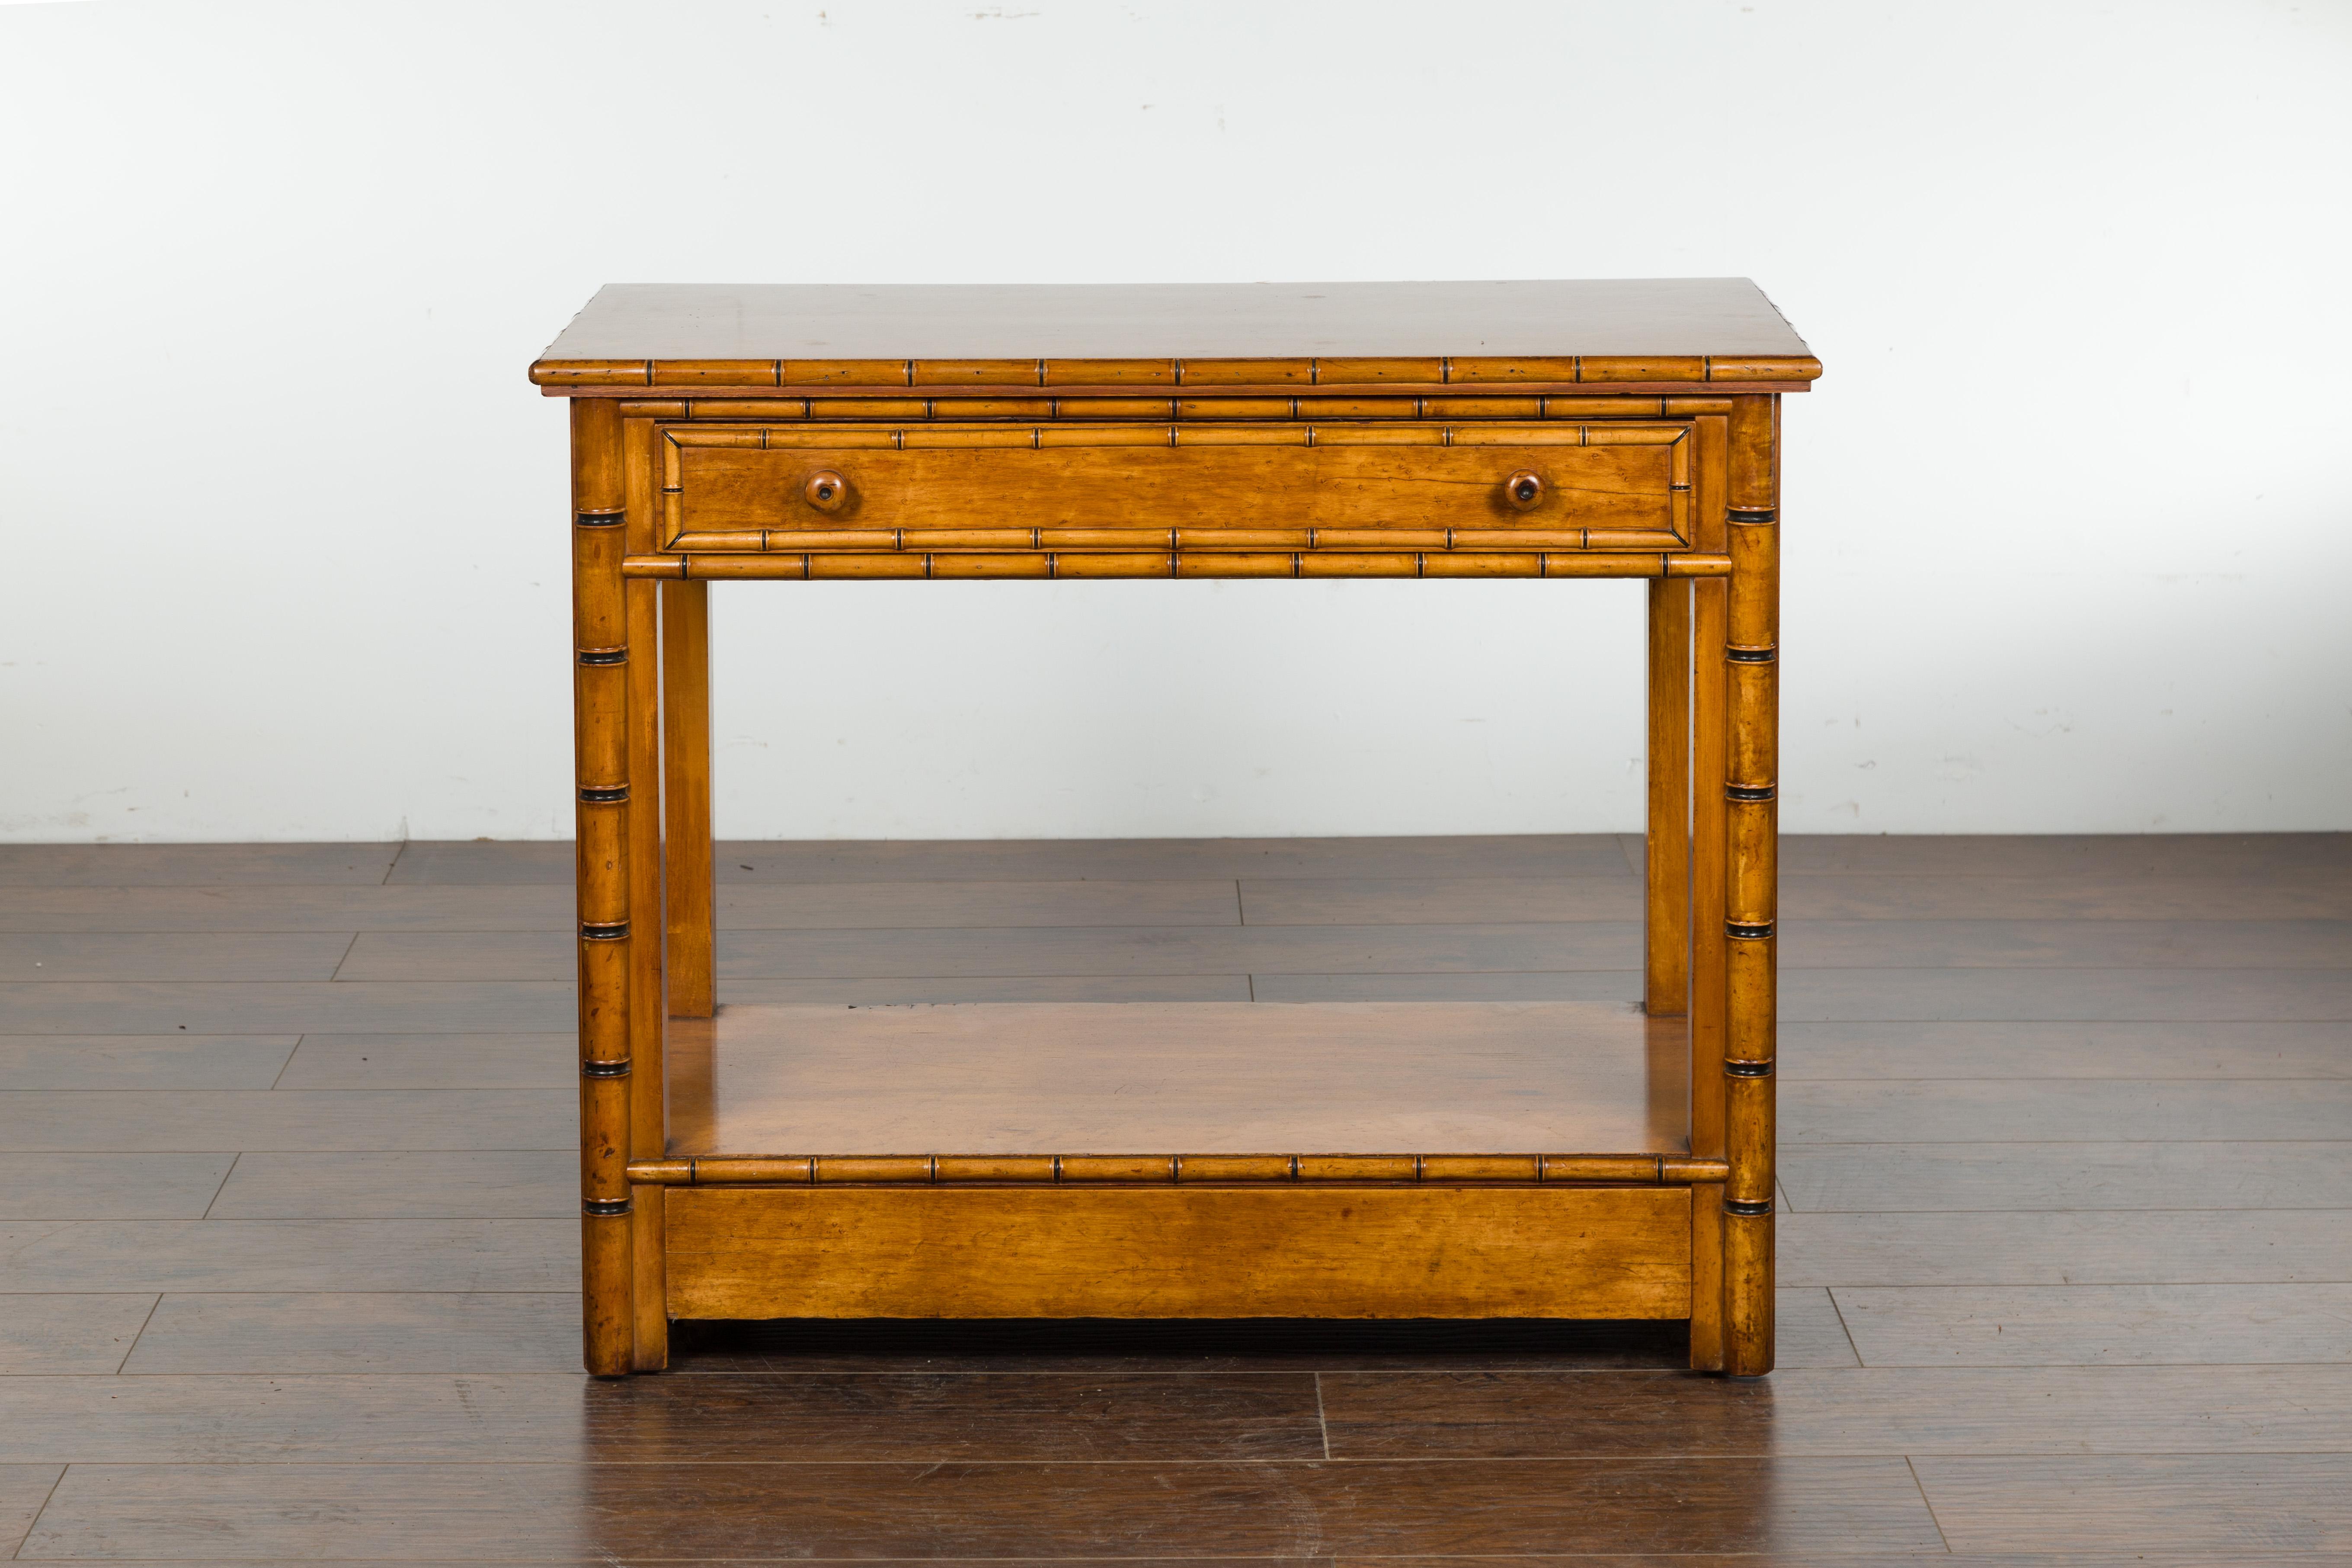 An English burl walnut faux bamboo table from the late 19th century, with ebonized accents, single drawer, lower shelf and petite hidden wheels. Created in England during the last quarter of the 19th century, this faux bamboo table features a